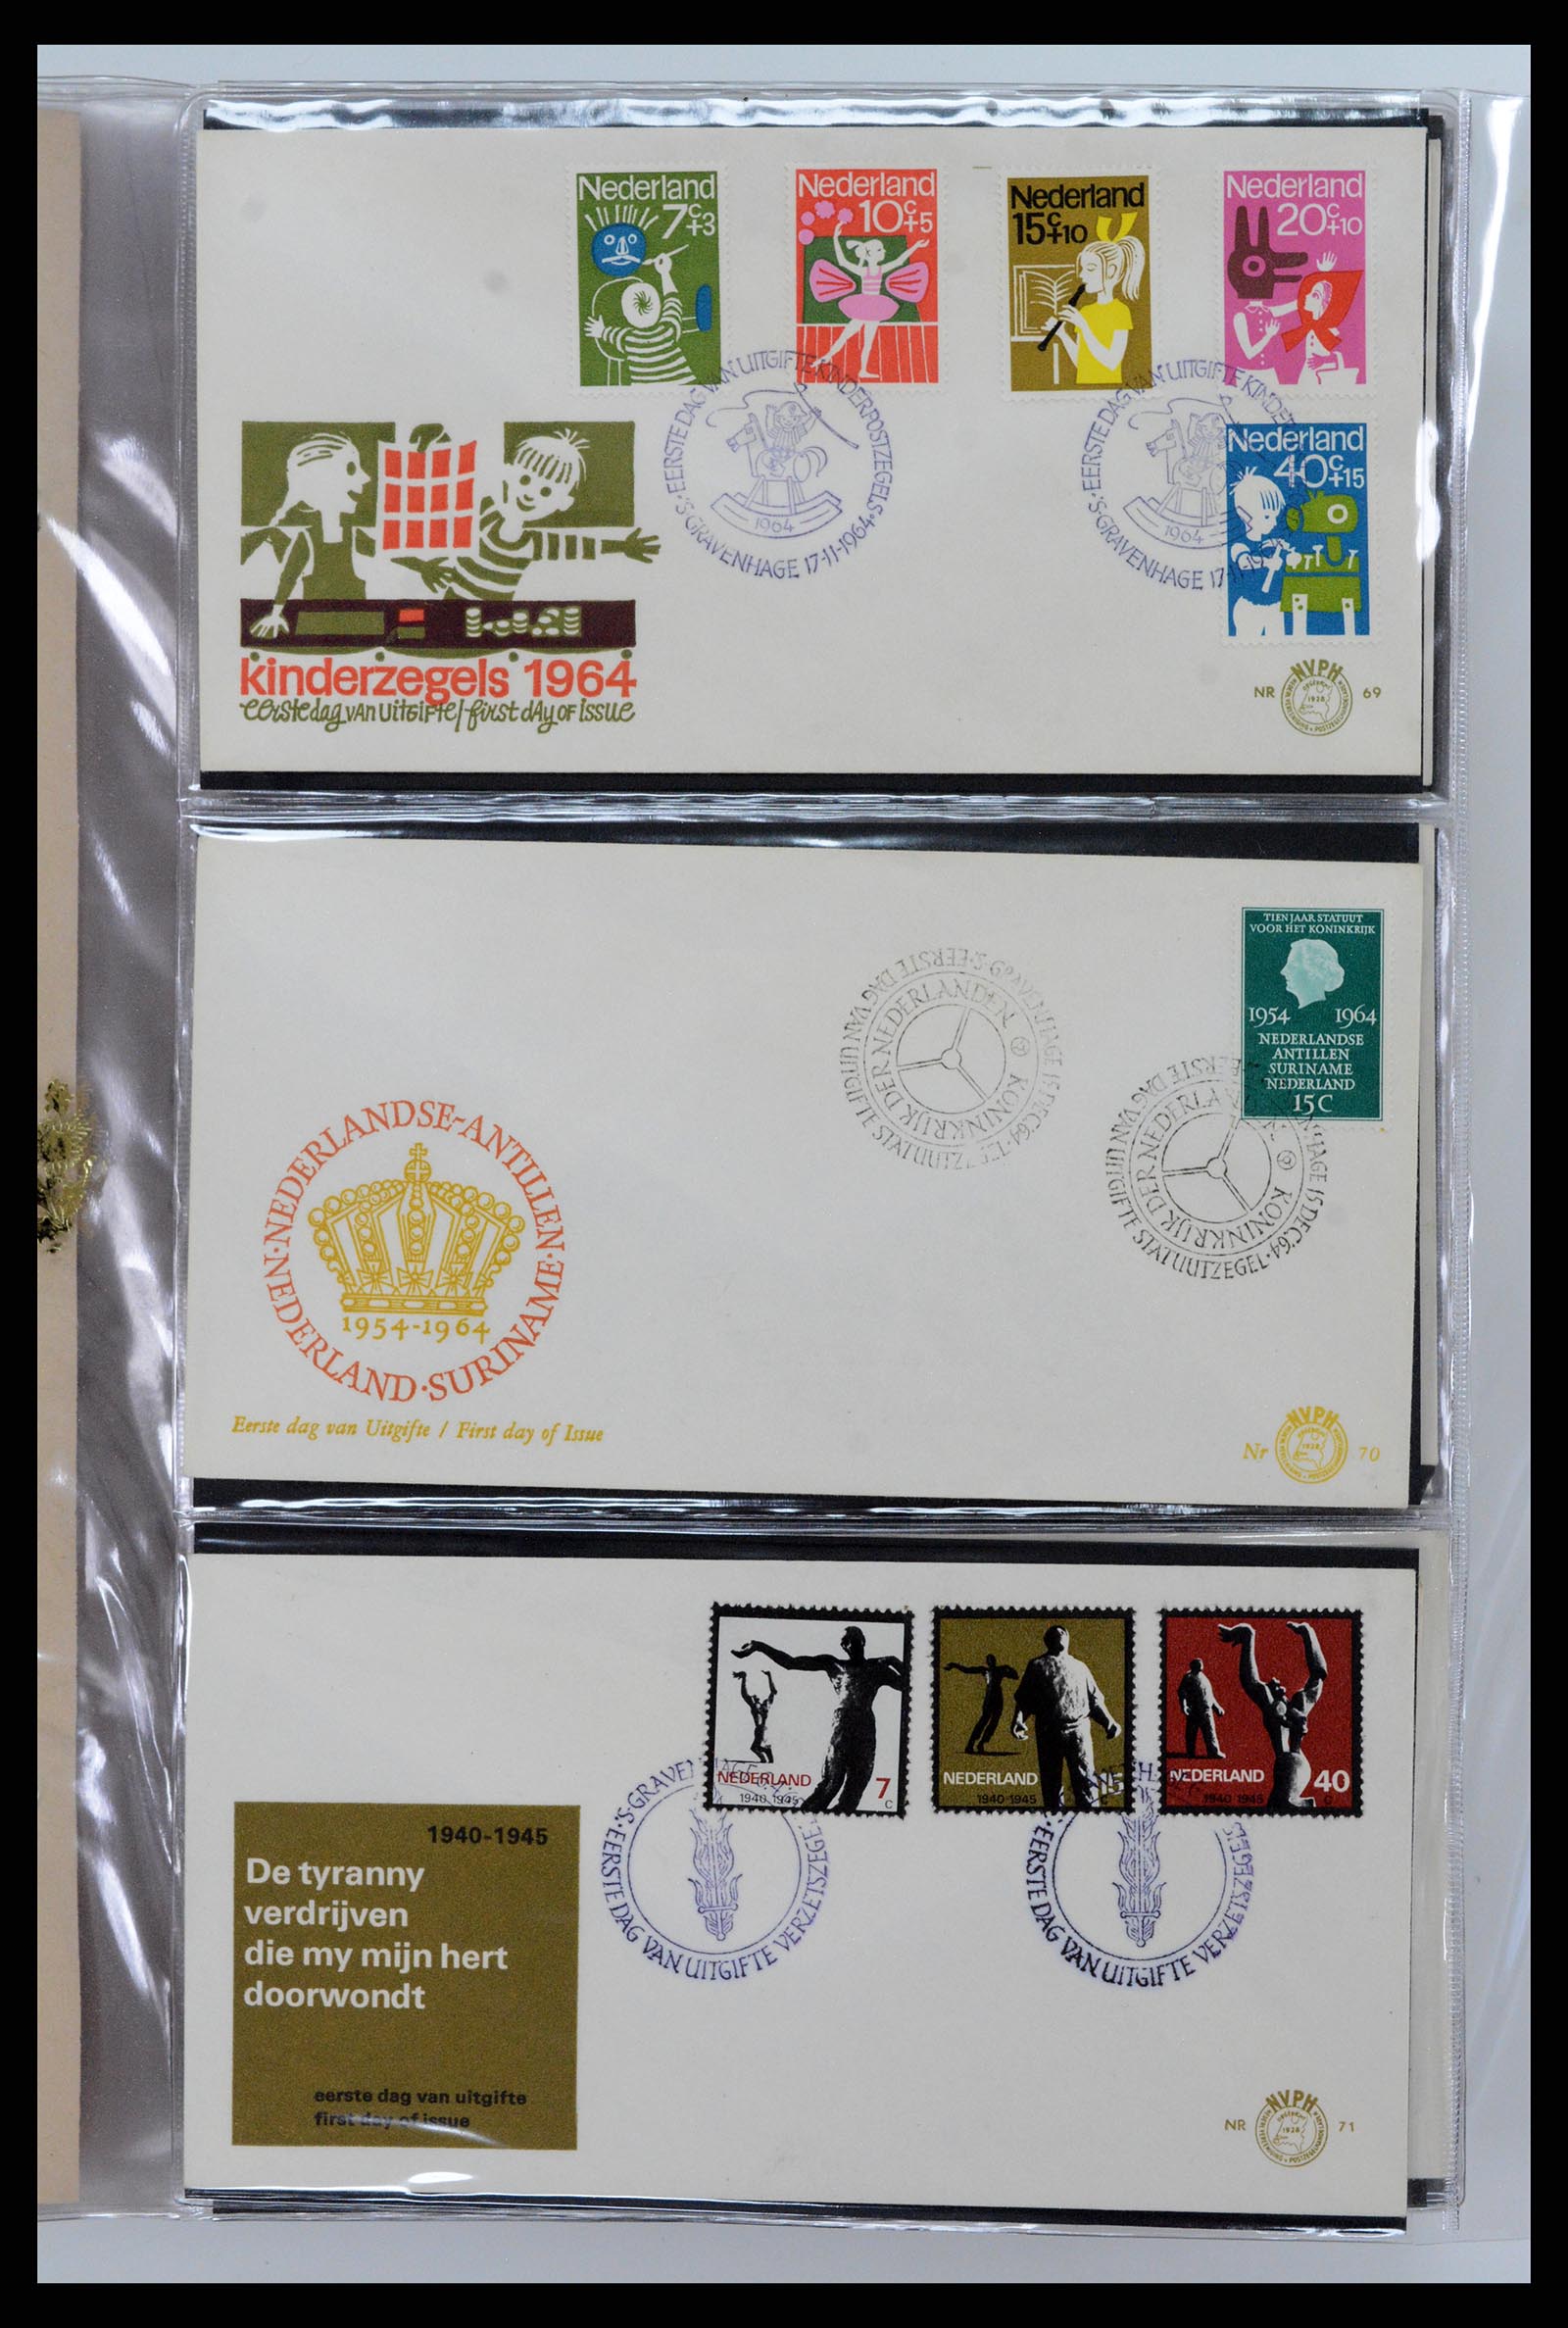 37461 024 - Stamp collection 37461 Netherlands FDC's 1950-2014.